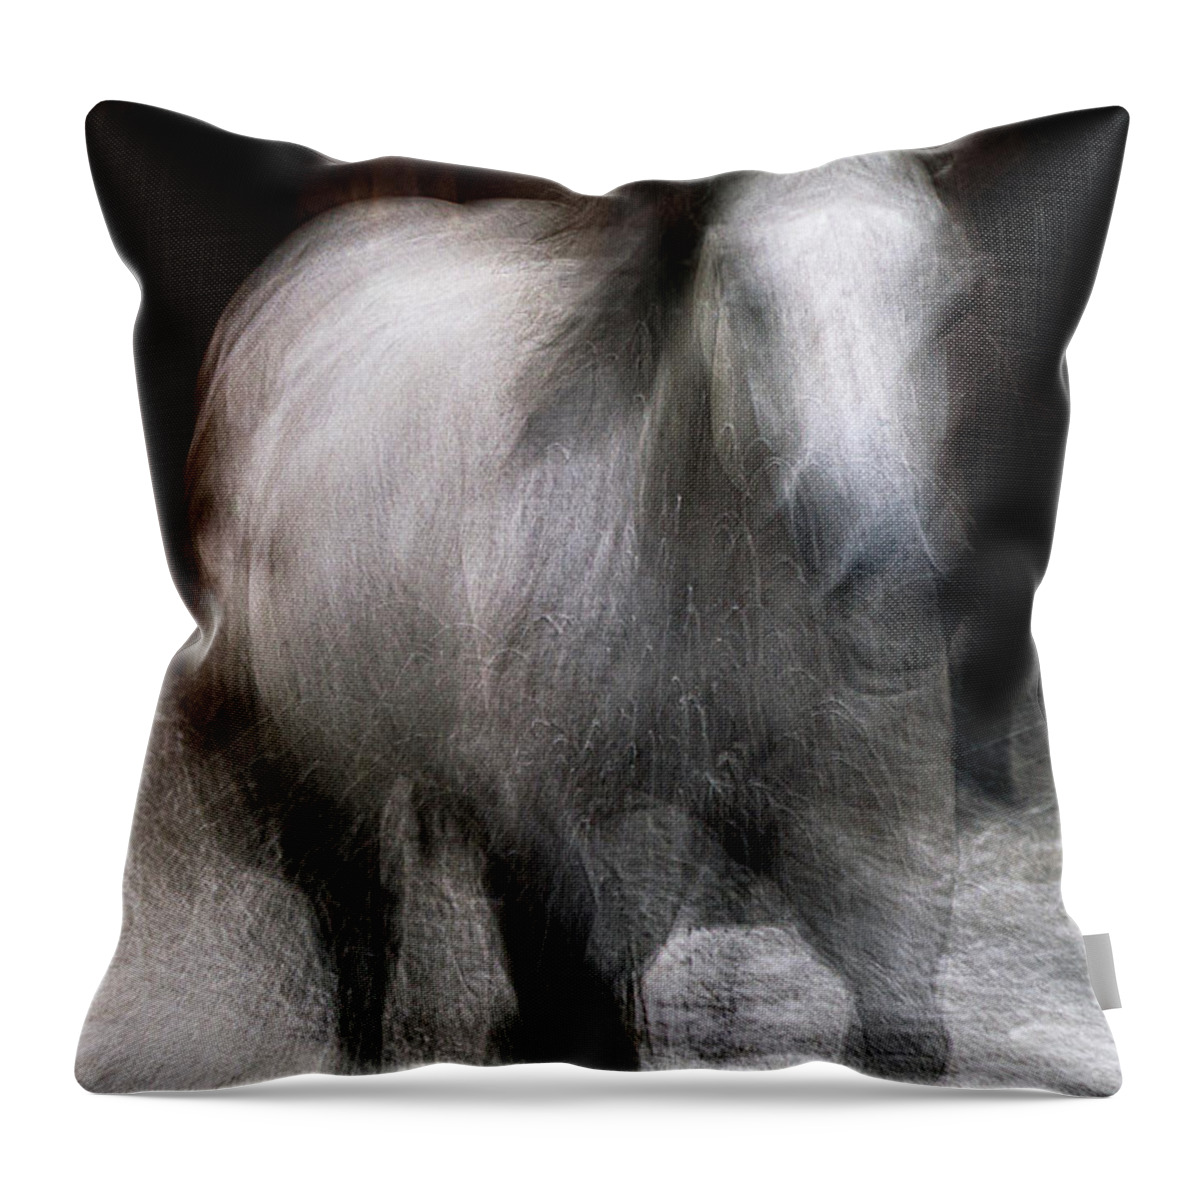 Landscape Throw Pillow featuring the photograph Horse by Grant Galbraith